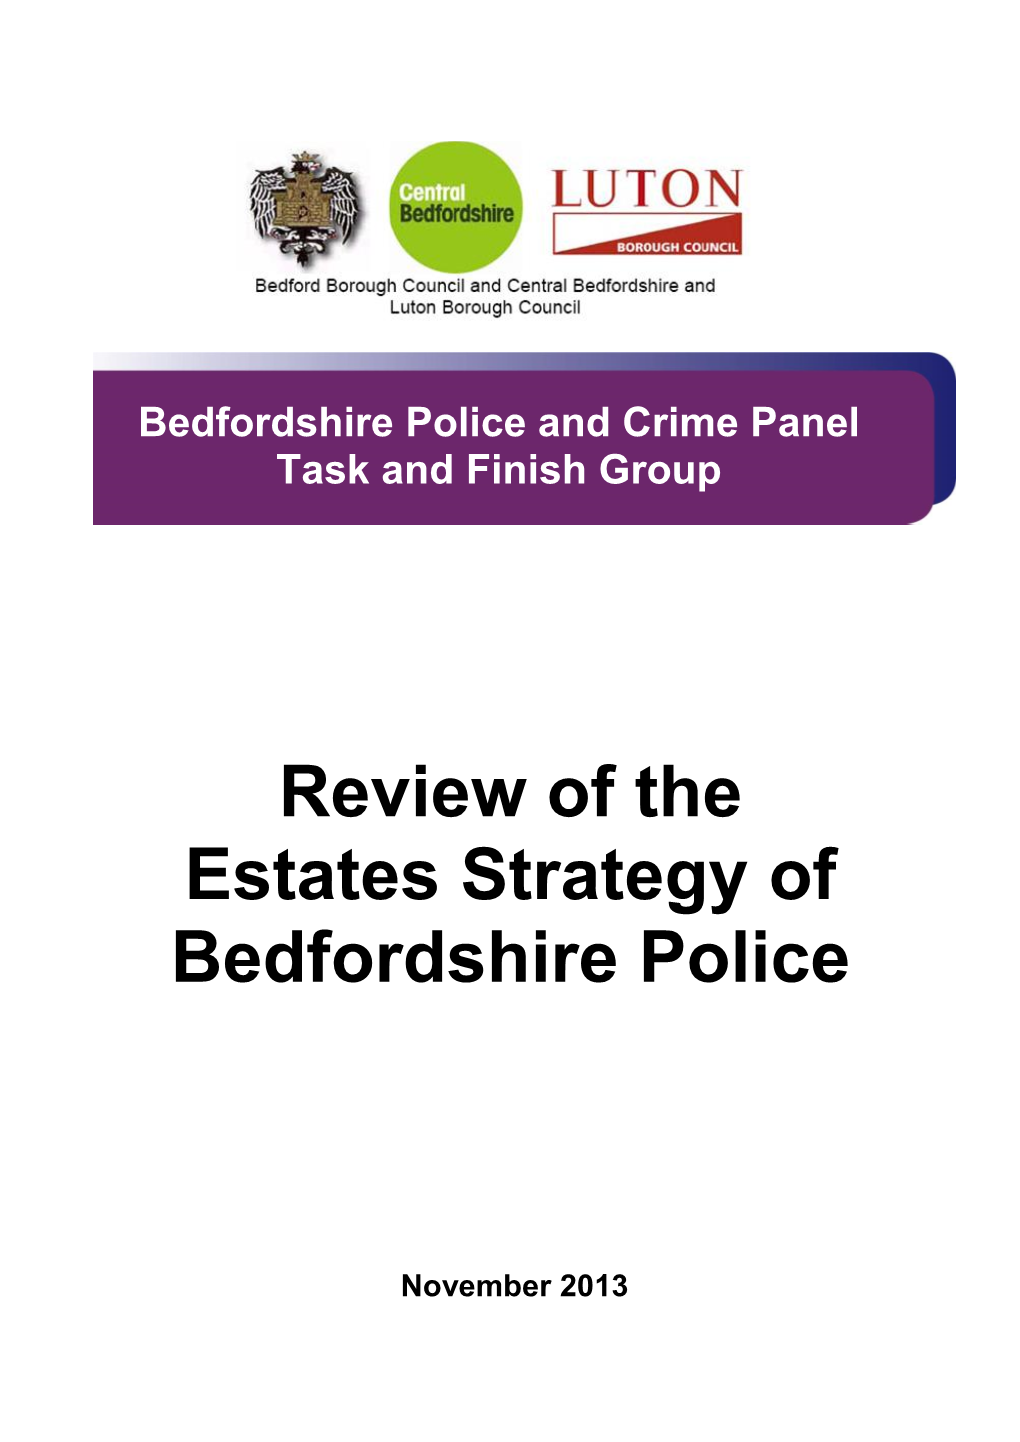 Review of the Estates Strategy of Bedfordshire Police